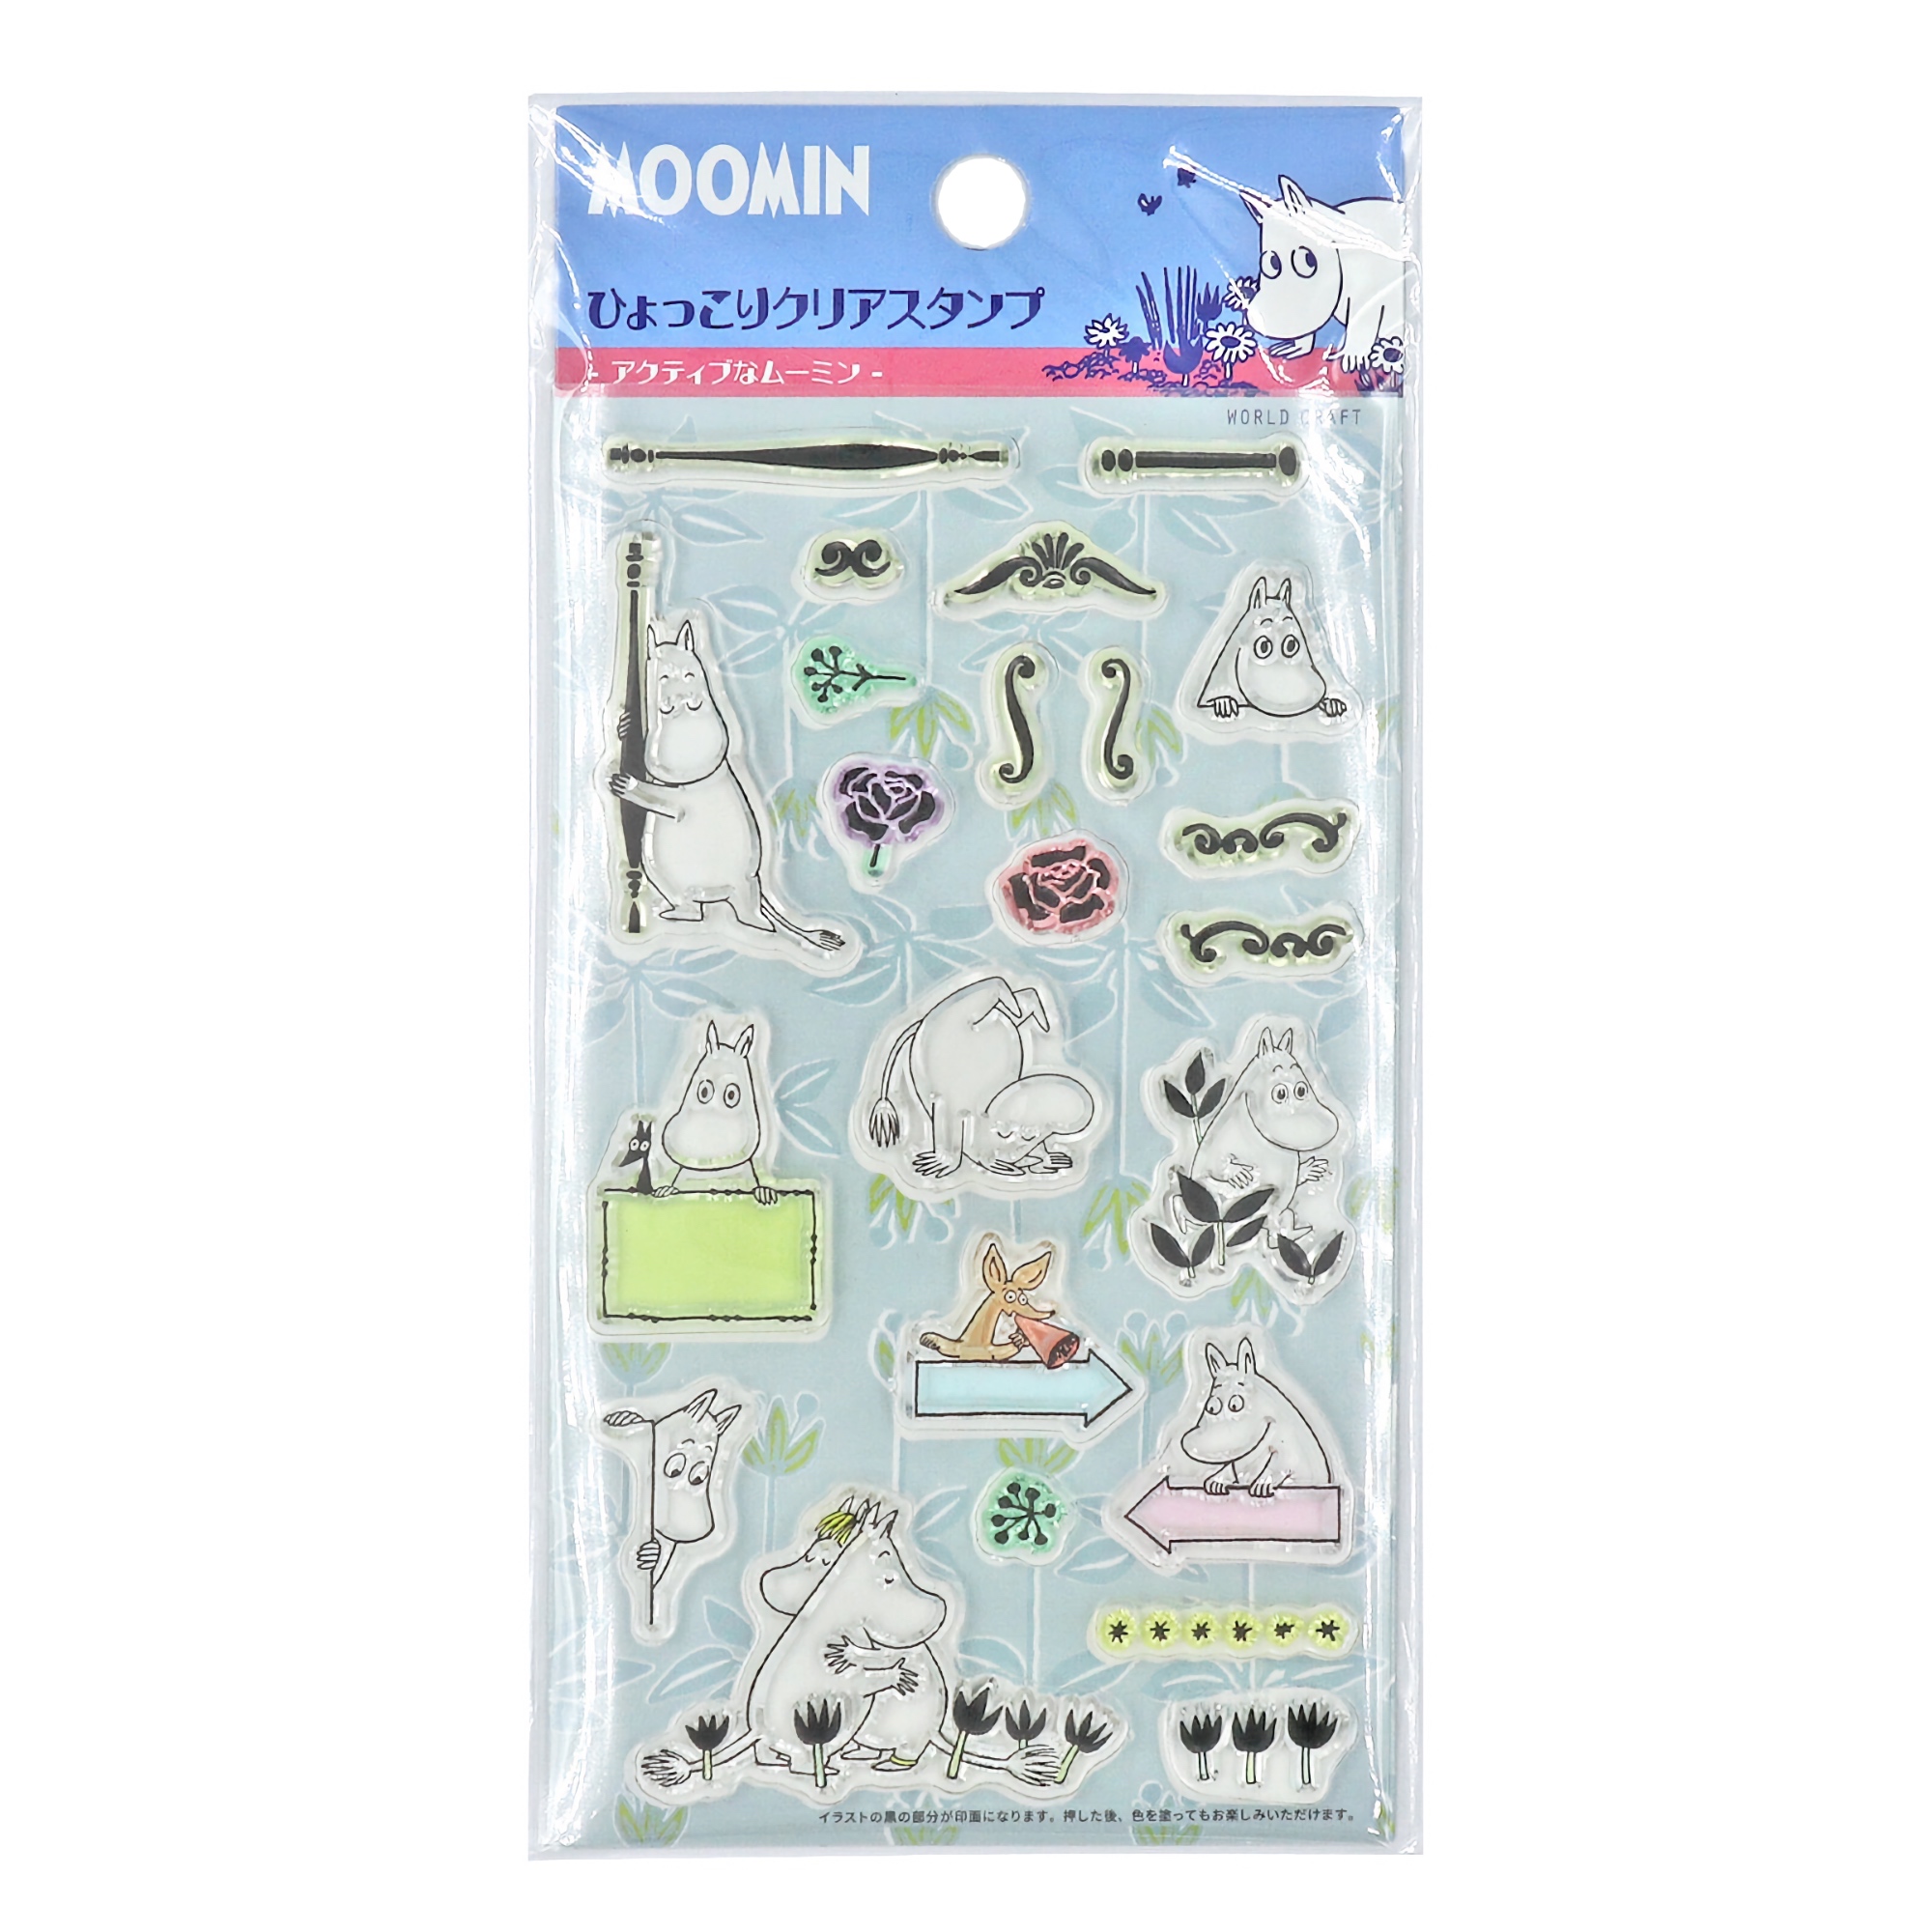 World Craft Clear Stamp Moomin Characters